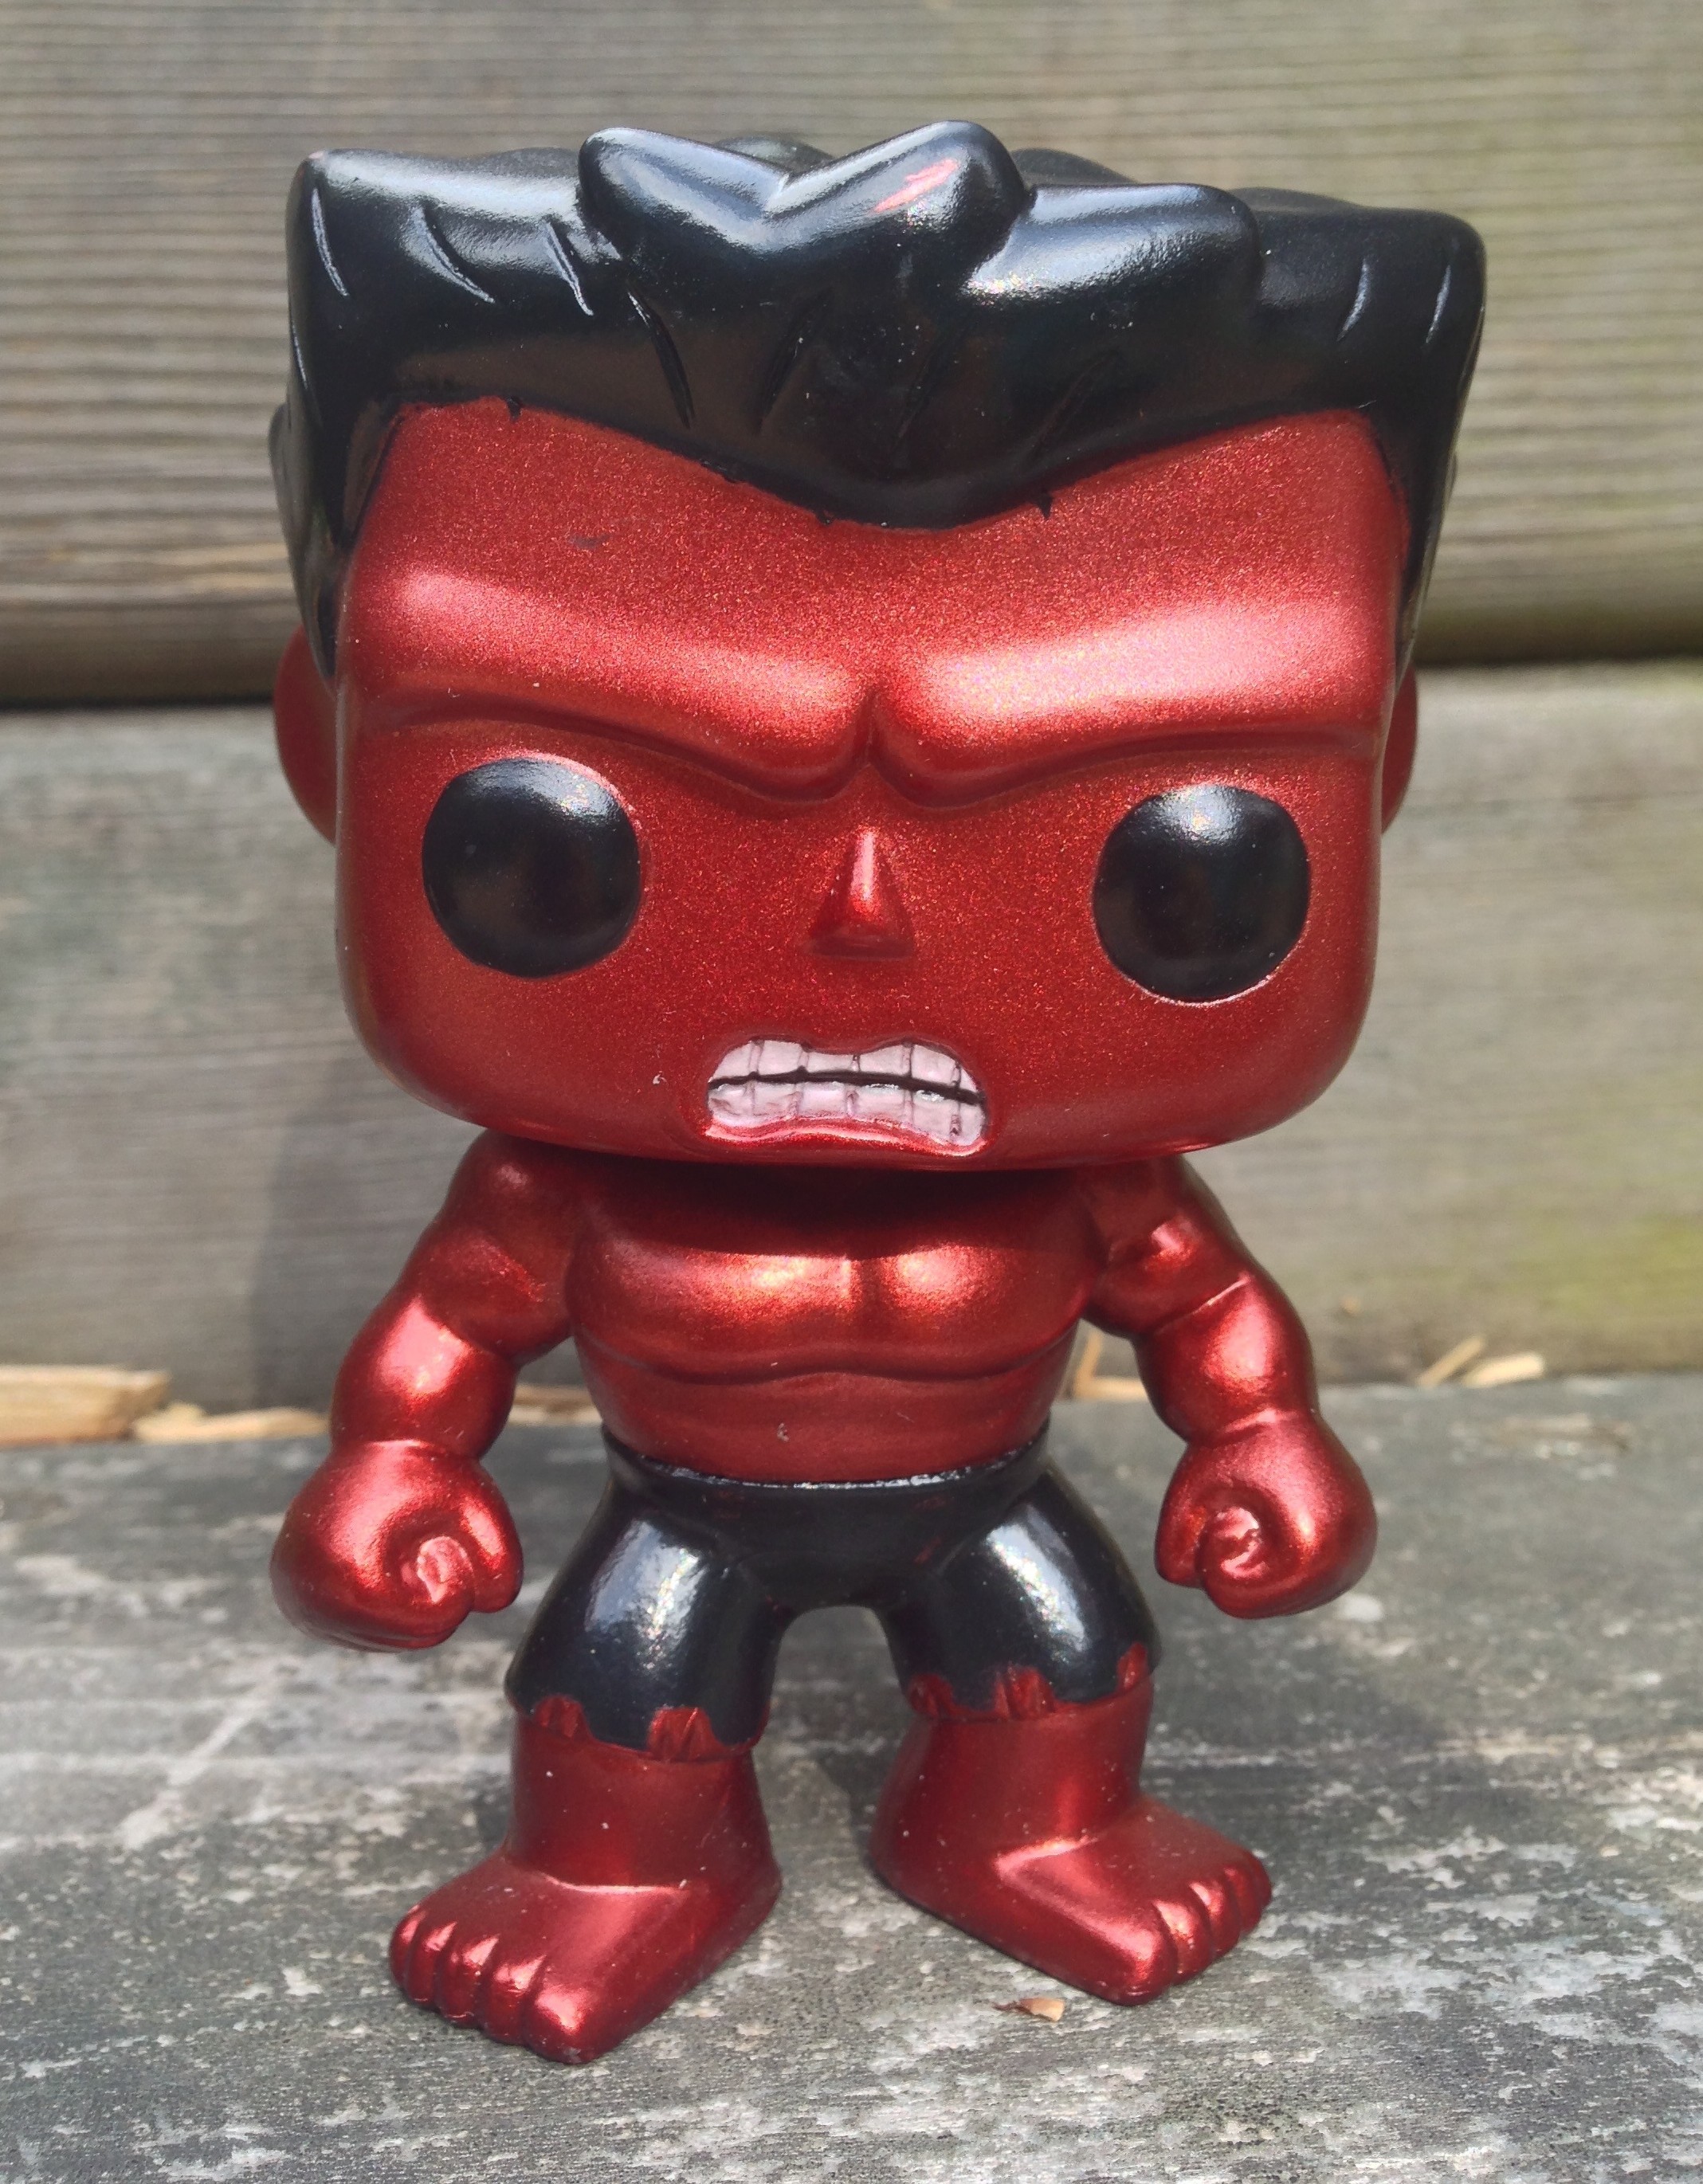 Funko Pop Charles Leclerc - Figurines D'action - AliExpress